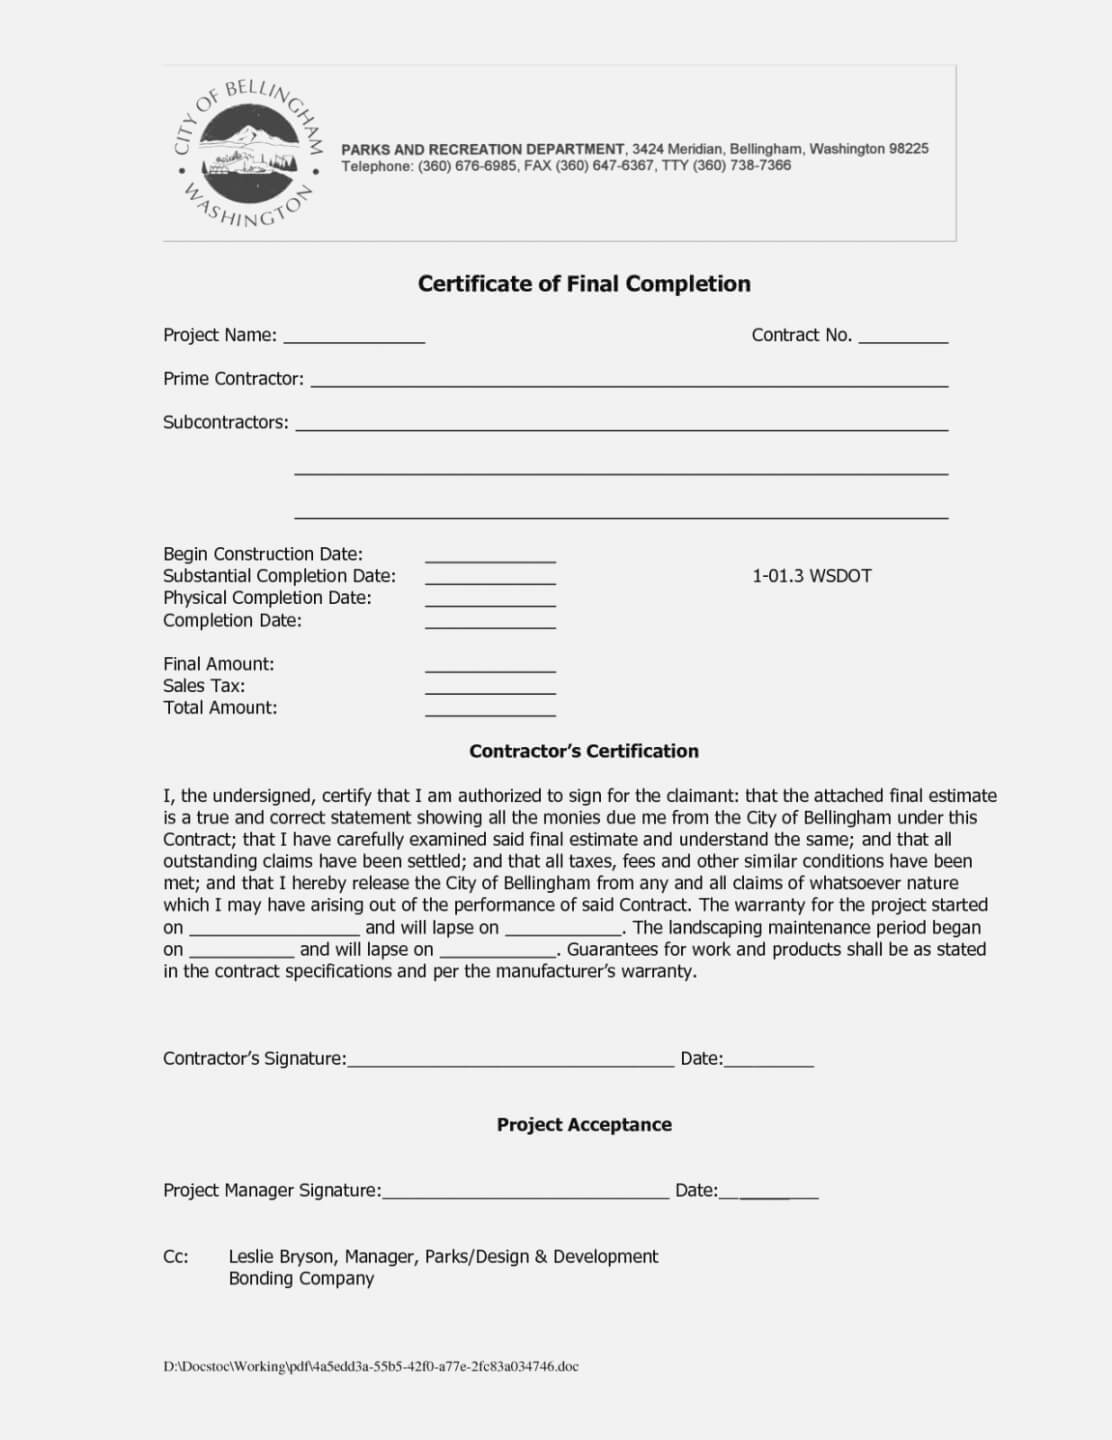 Roofing Certificate Of Completion Template – Yatay Regarding Certificate Of Completion Template Construction